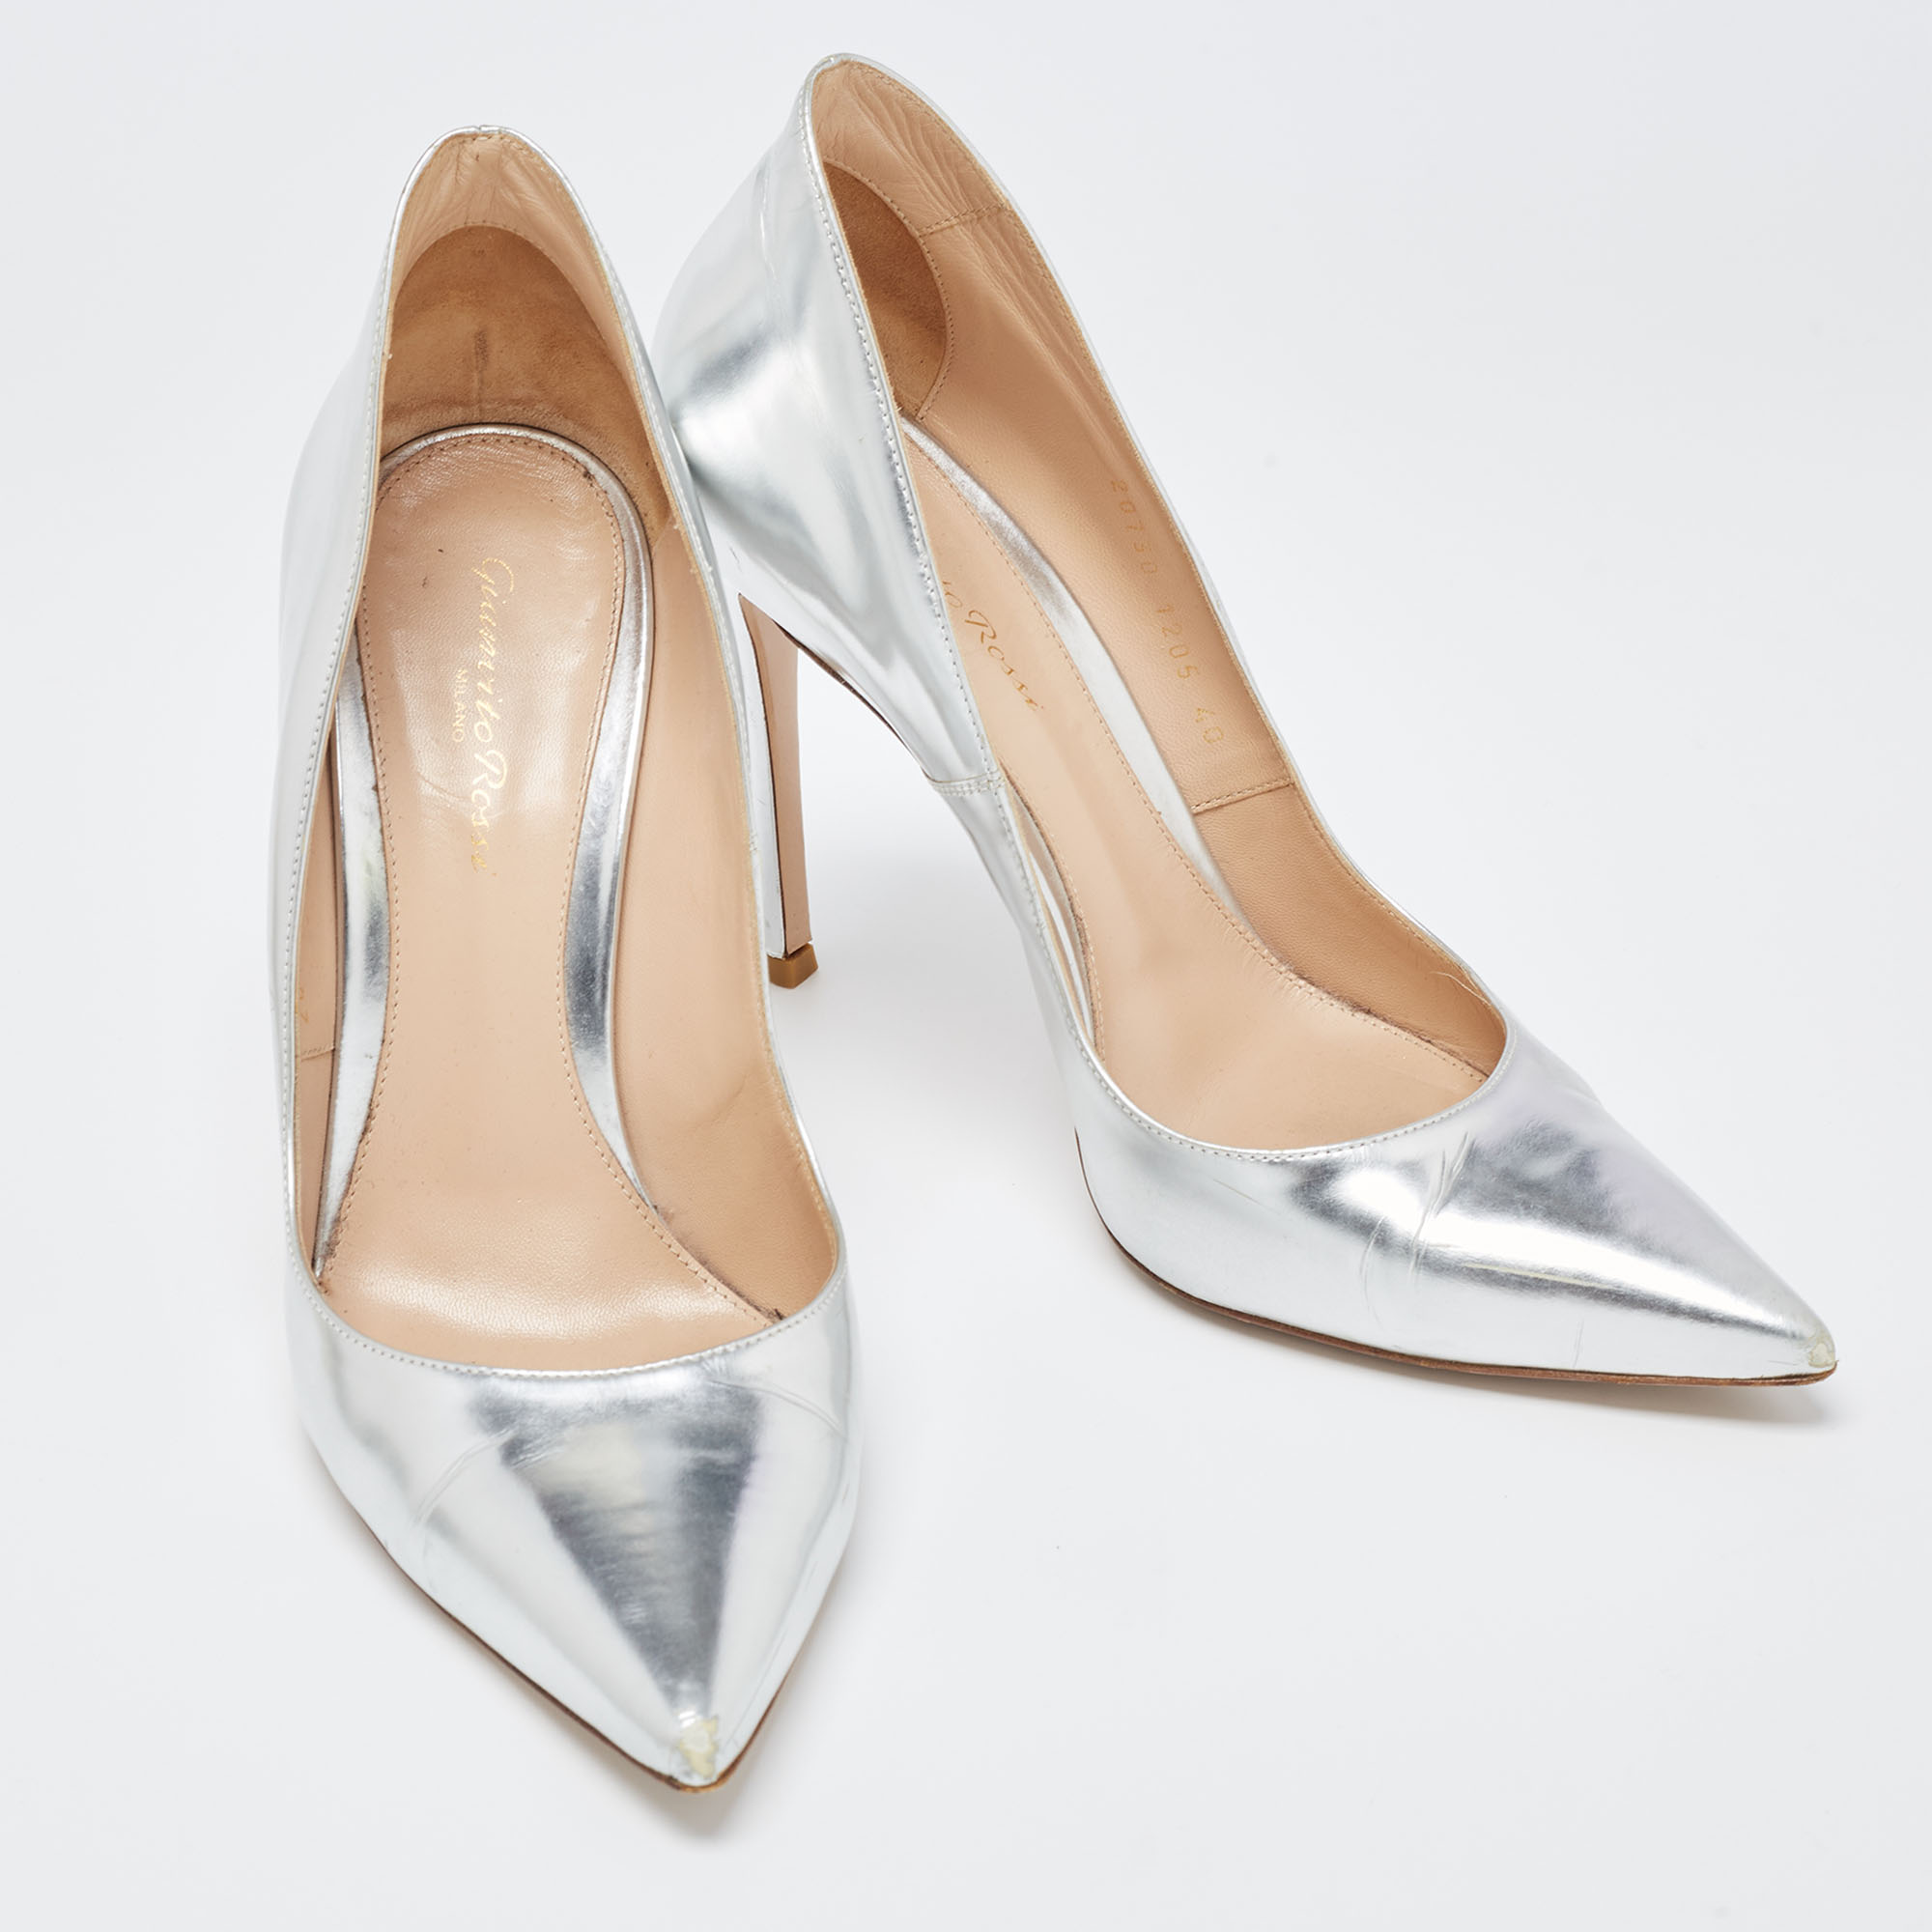 Gianvito Rossi Silver Leather Pointed Toe Pumps Size 40